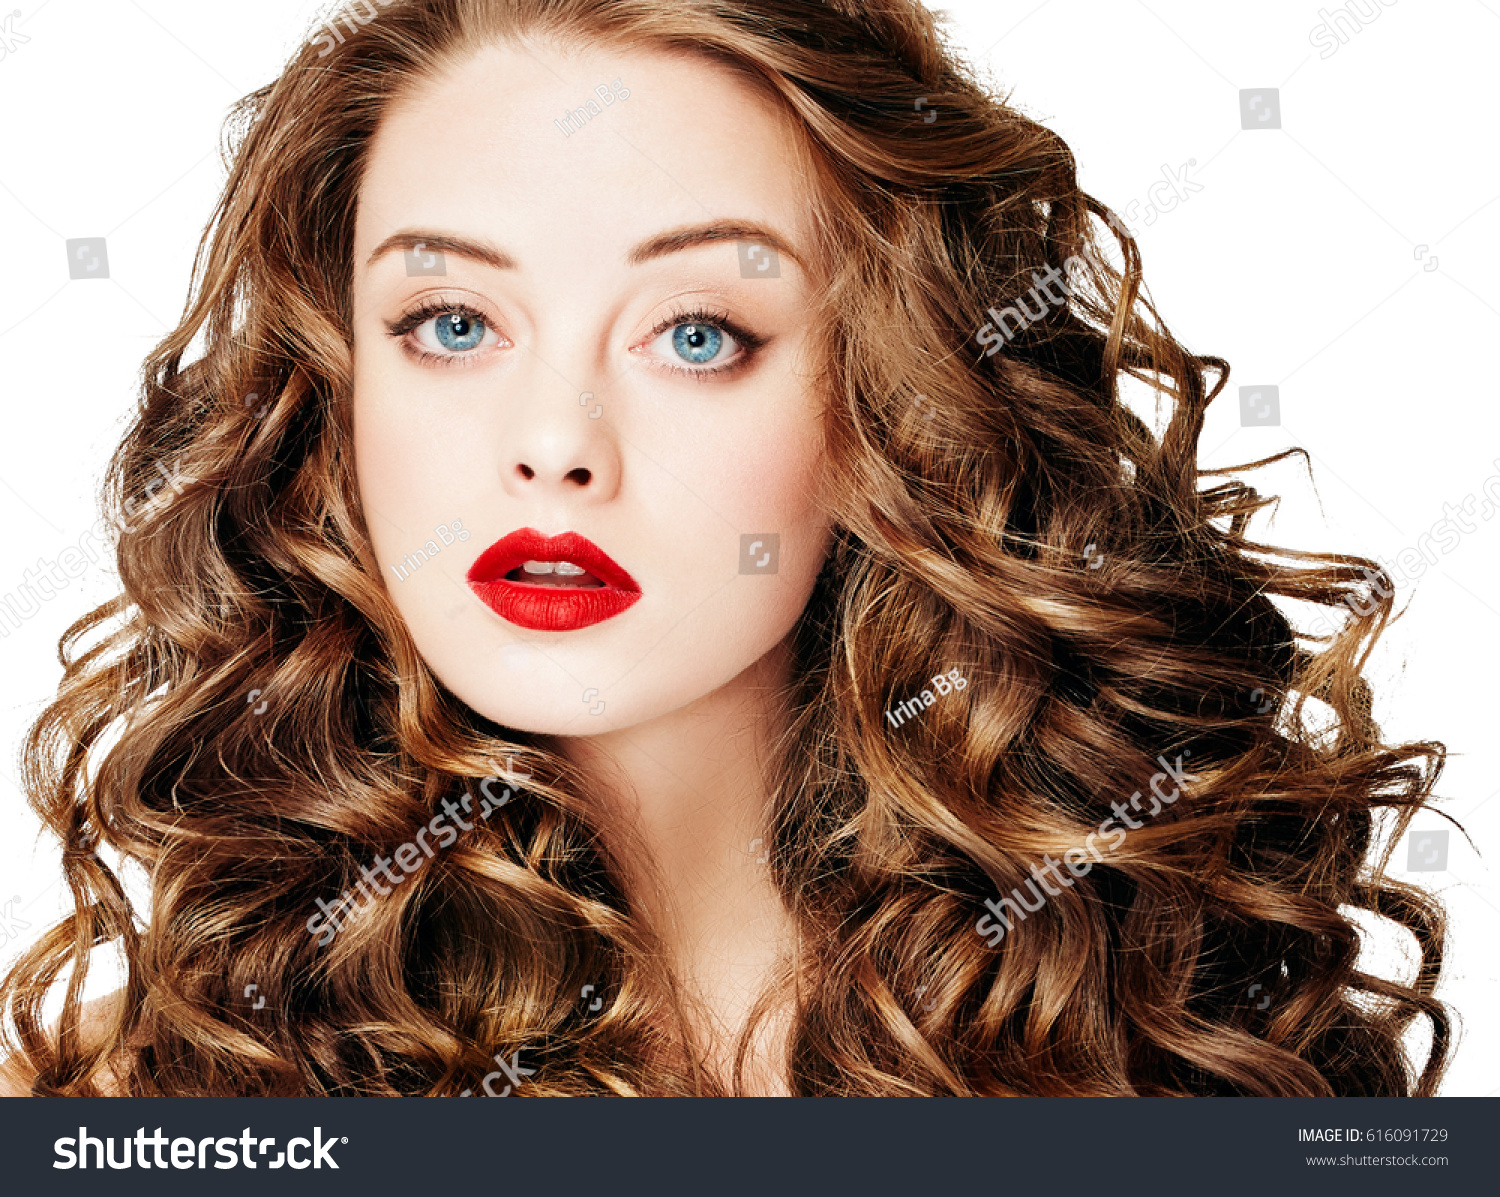 Beautiful People Curly Hair Red Lipsq Stock Photo Edit Now 616091729